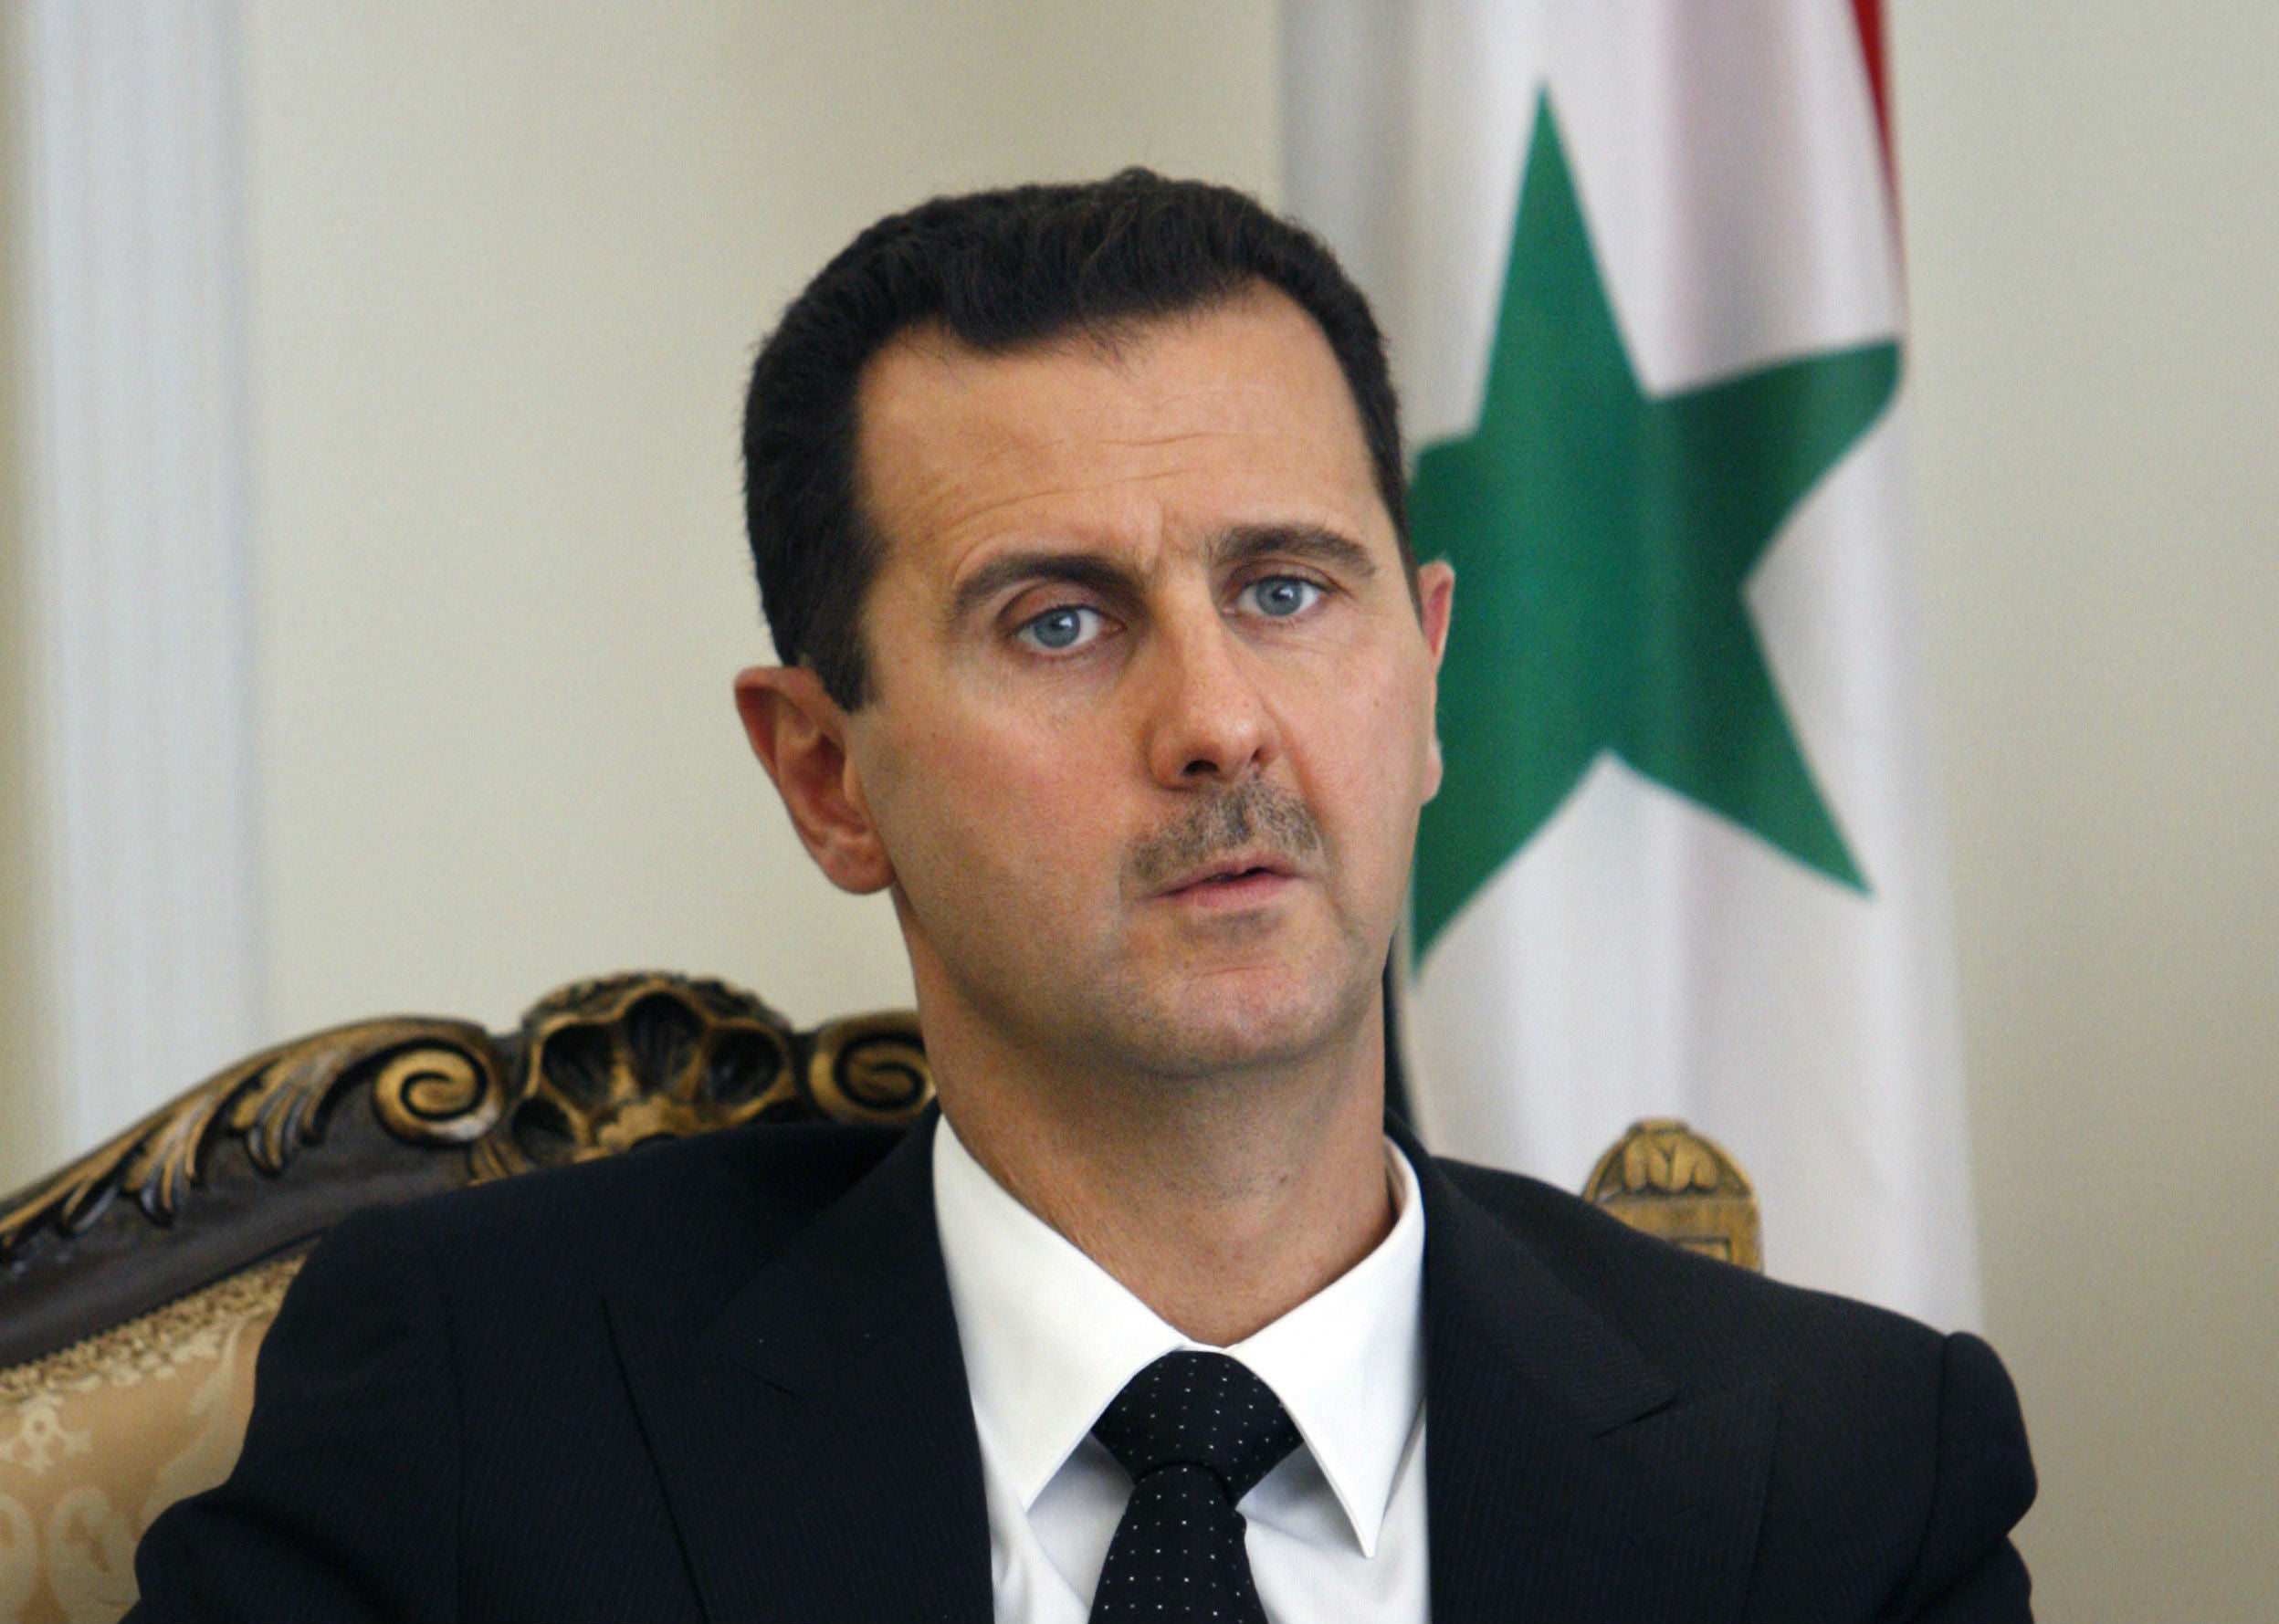 Russia supports the government of Syrian leader Bashar al-Assad